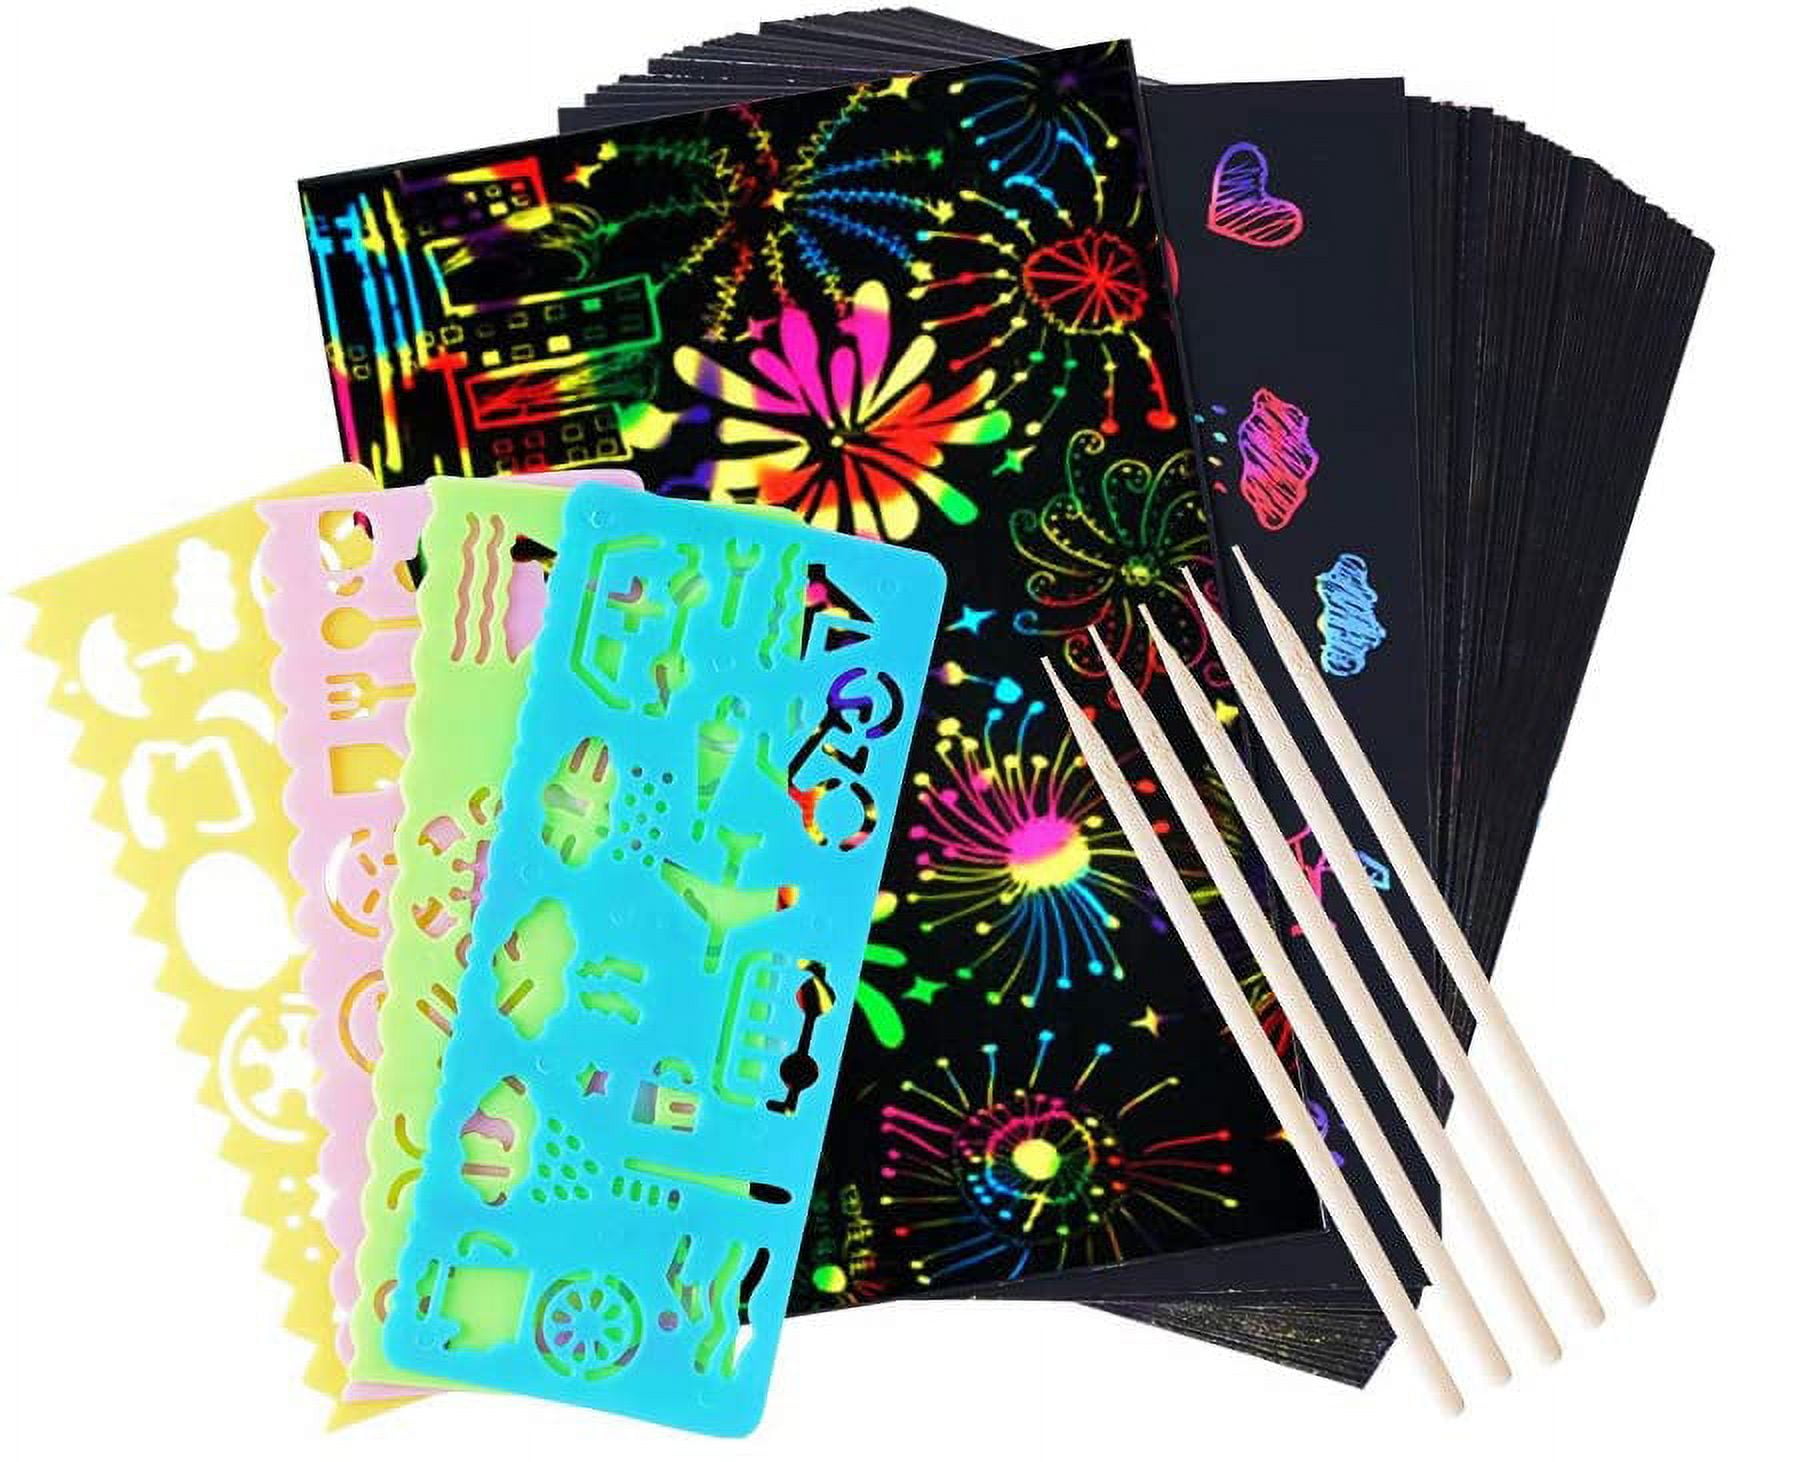 Rainbow Scratch Paper Art Set, 50 LARGE Sheets + 5 Wooden Styluses + 4  Drawing Molds, Kids Arts and Crafts Supplies, Sketching Gift for Childrens  Party, Healthy Activity Kit for Children Boys